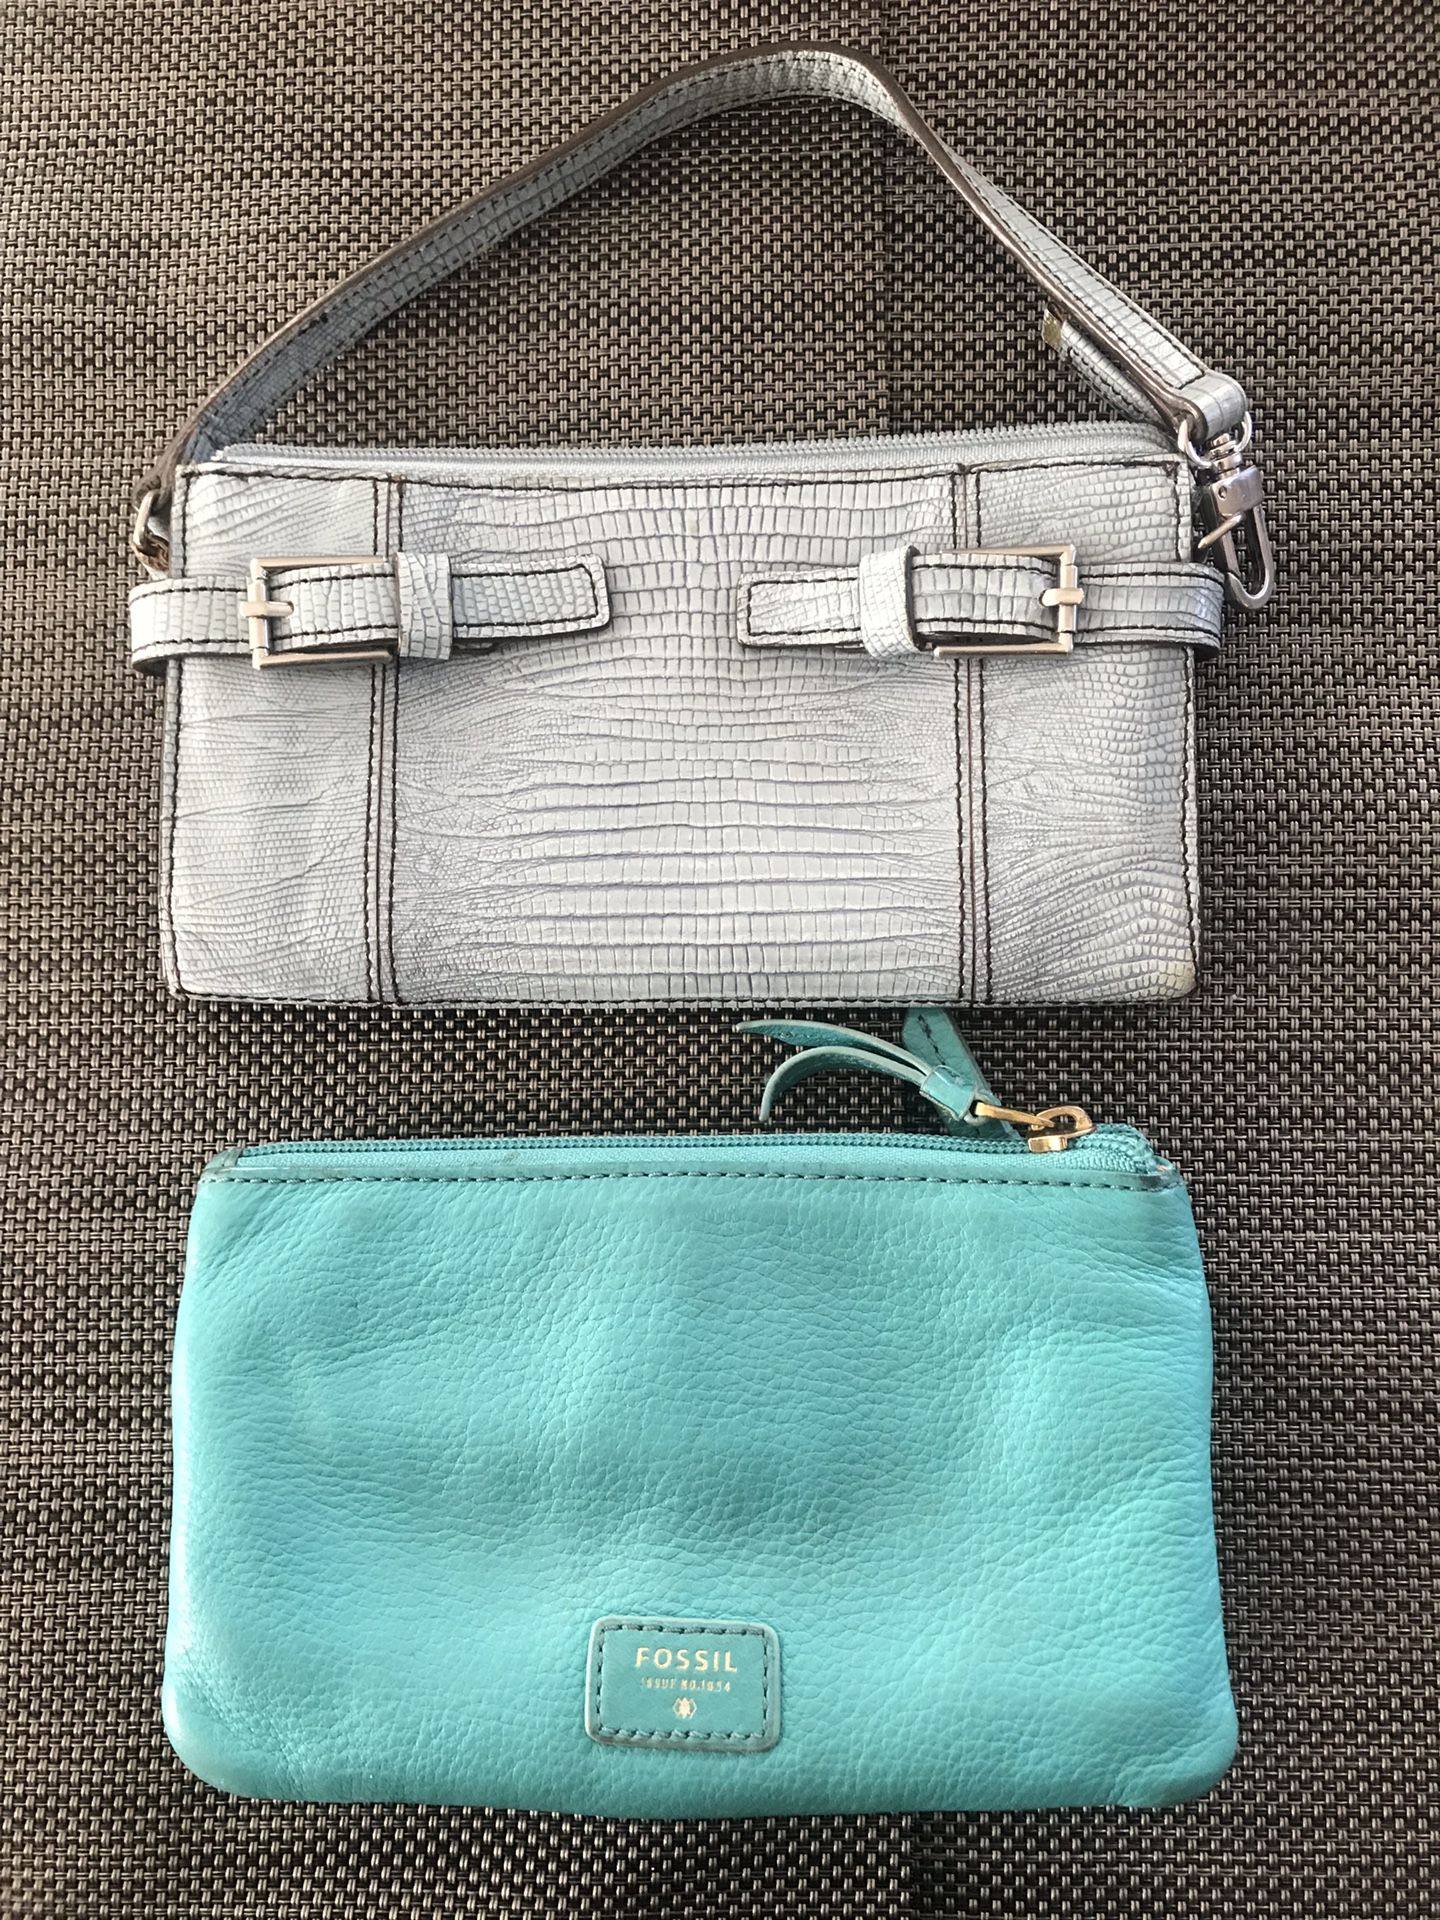 Kenneth Cole Wallet and Fossil wristlet set